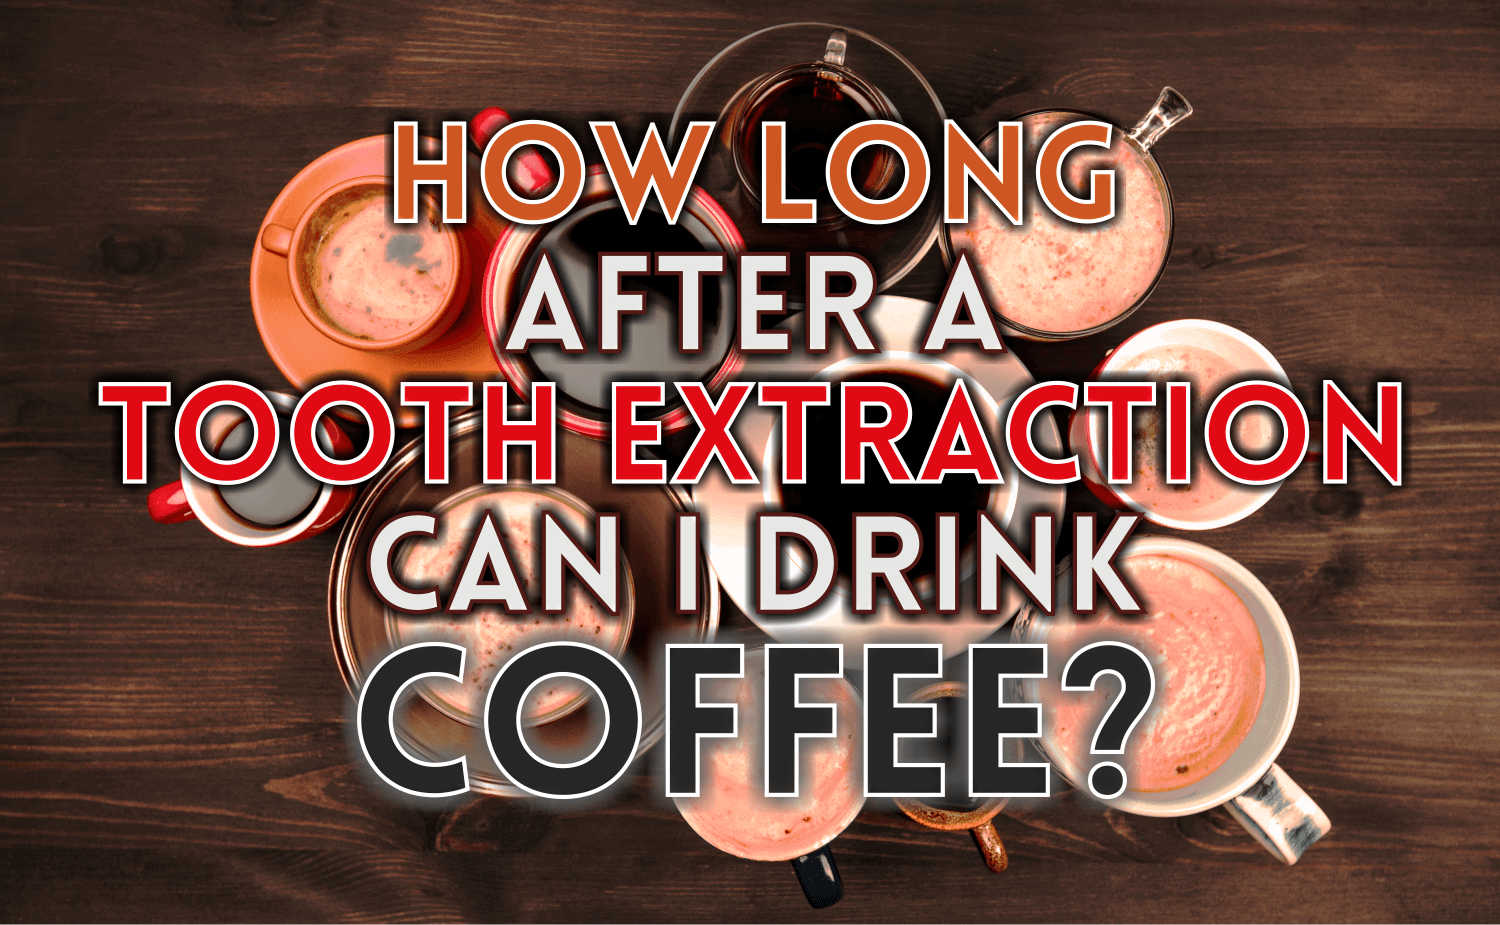 How Long After Tooth Extraction Can I Drink Coffee?